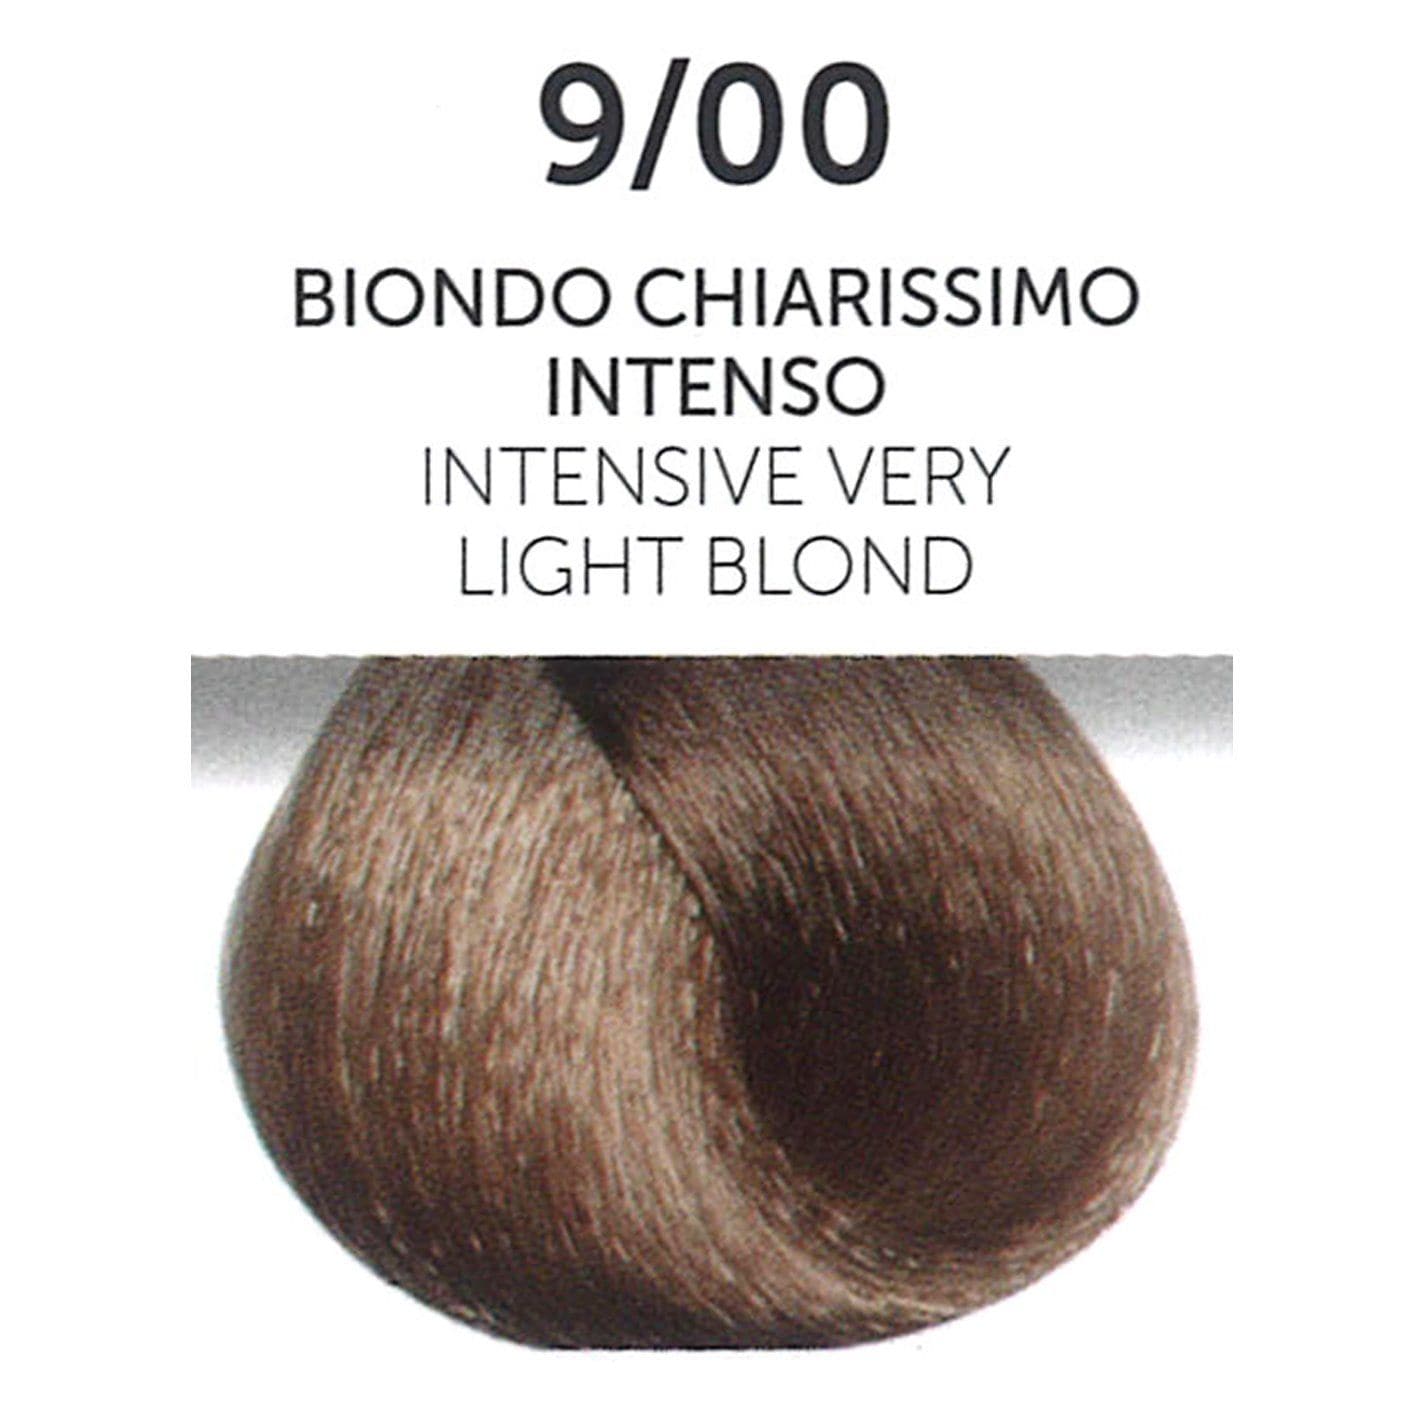 9/00 Intensive Very Light Blond | Permanent Hair Color | Perlacolor HAIR COLOR OYSTER 